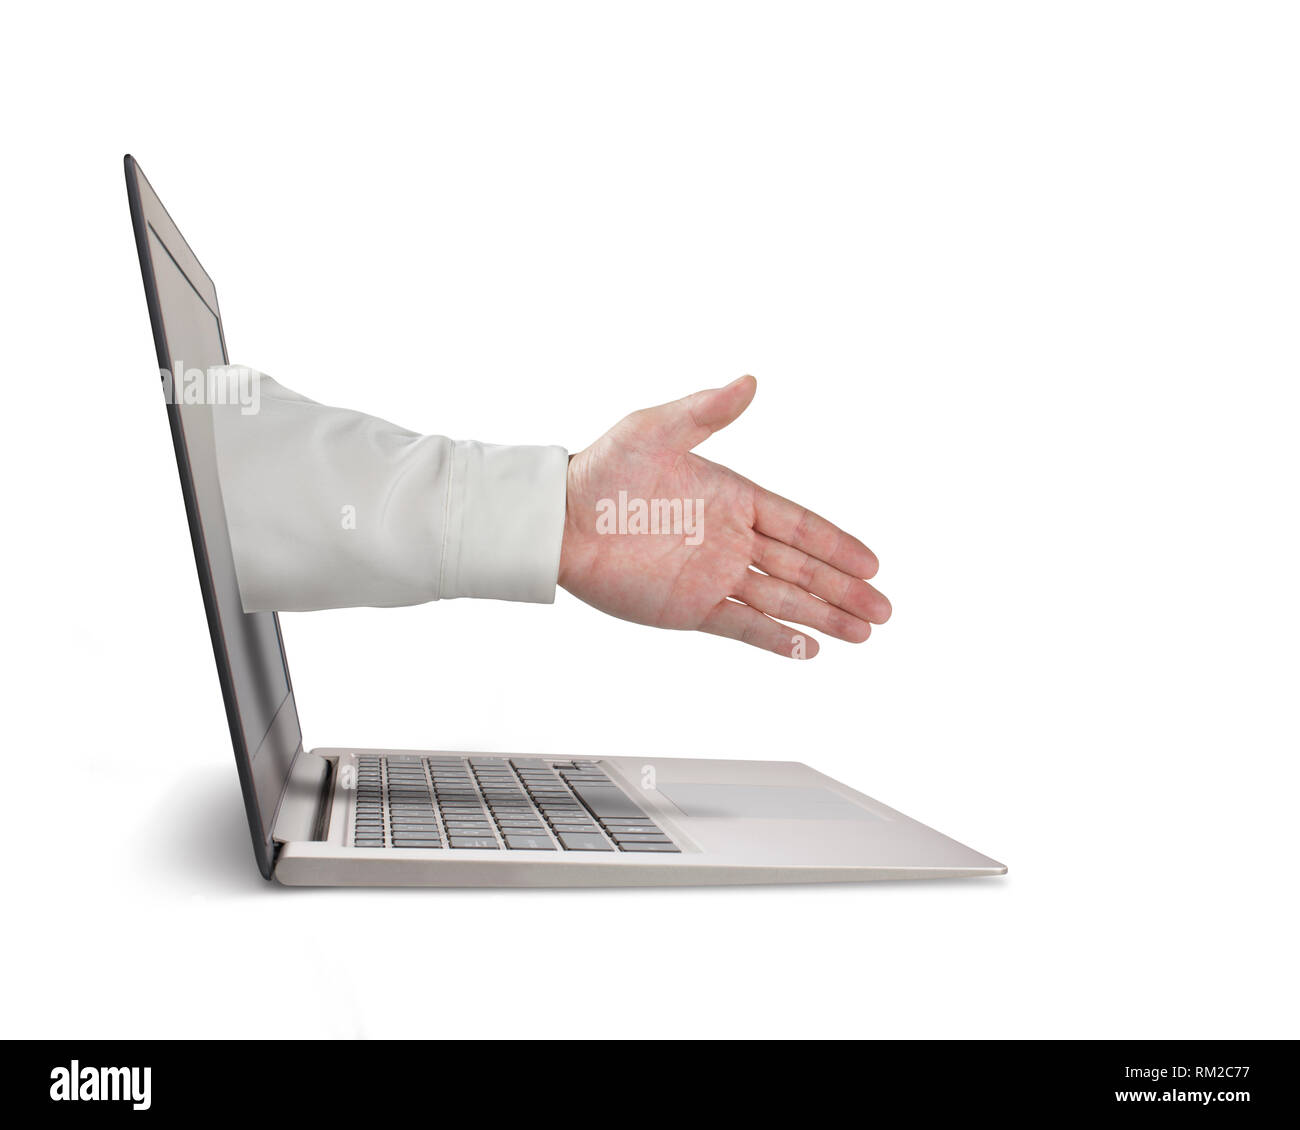 Man Playing Cyberchess Hand Reaching Into Computer To Make Move High-Res  Stock Photo - Getty Images